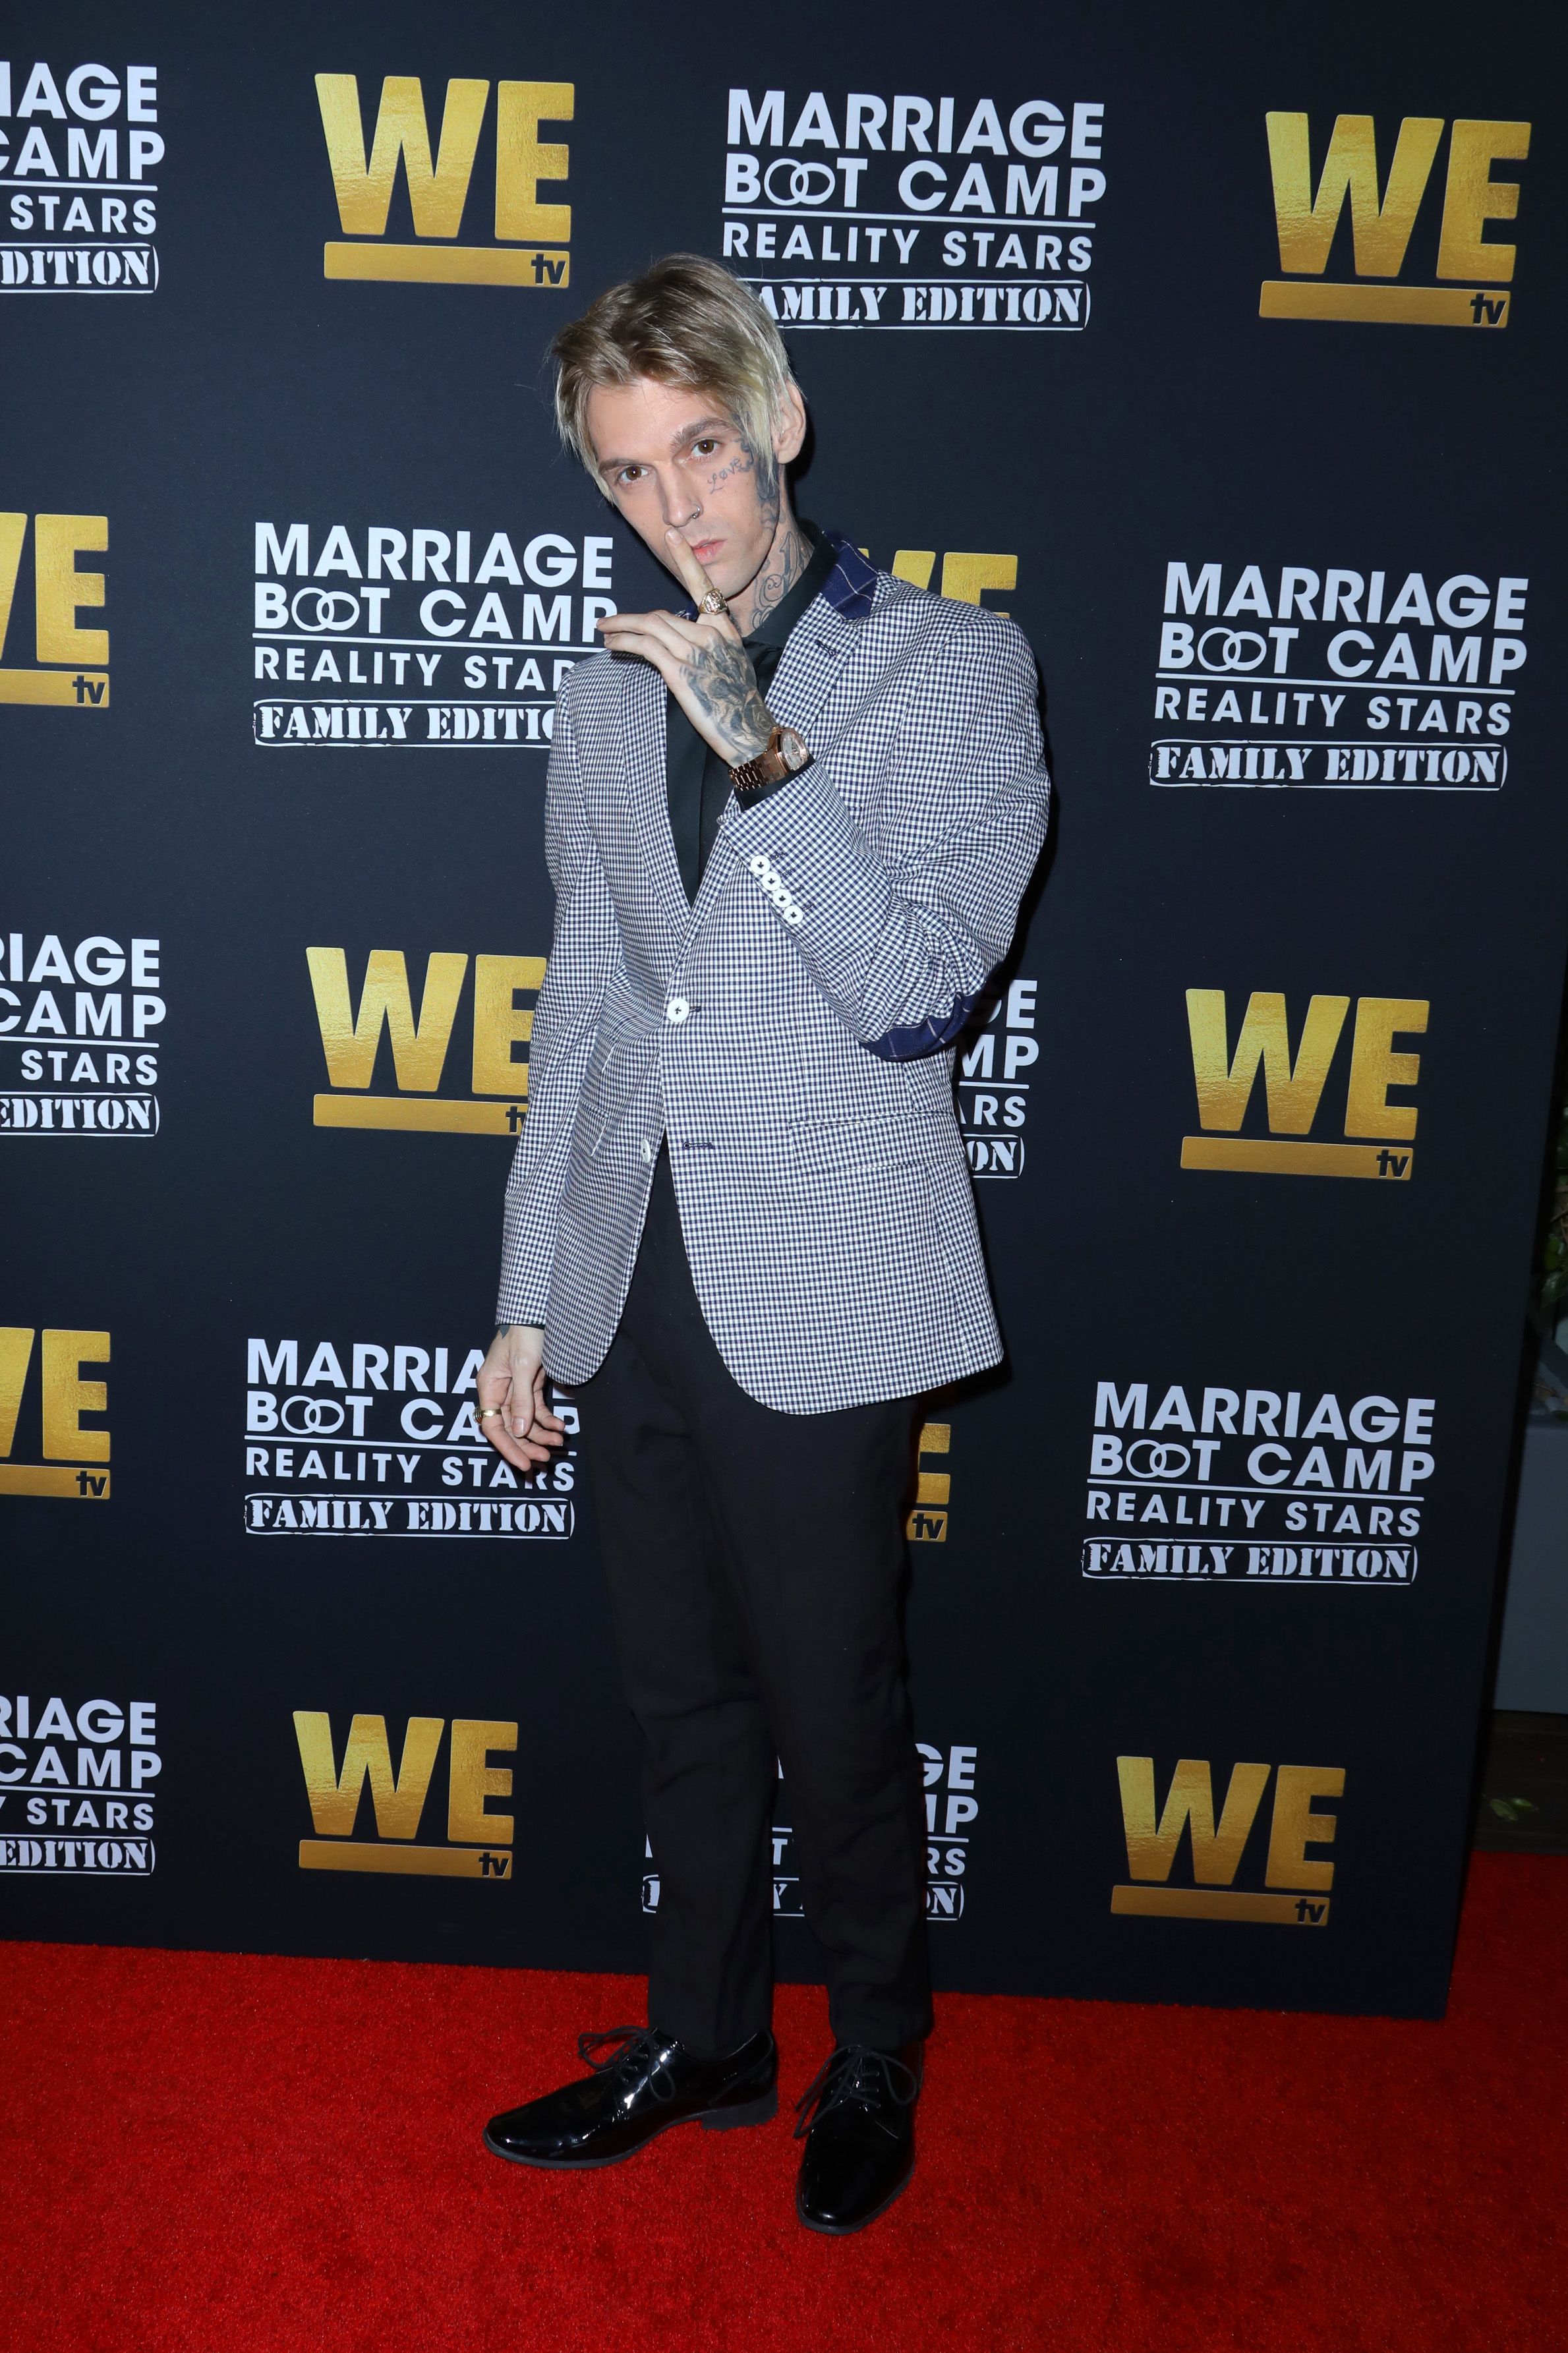 Aaron Carter at the premiere of "Marriage Boot Camp" in 2019 in West Hollywood | Source: Getty Images